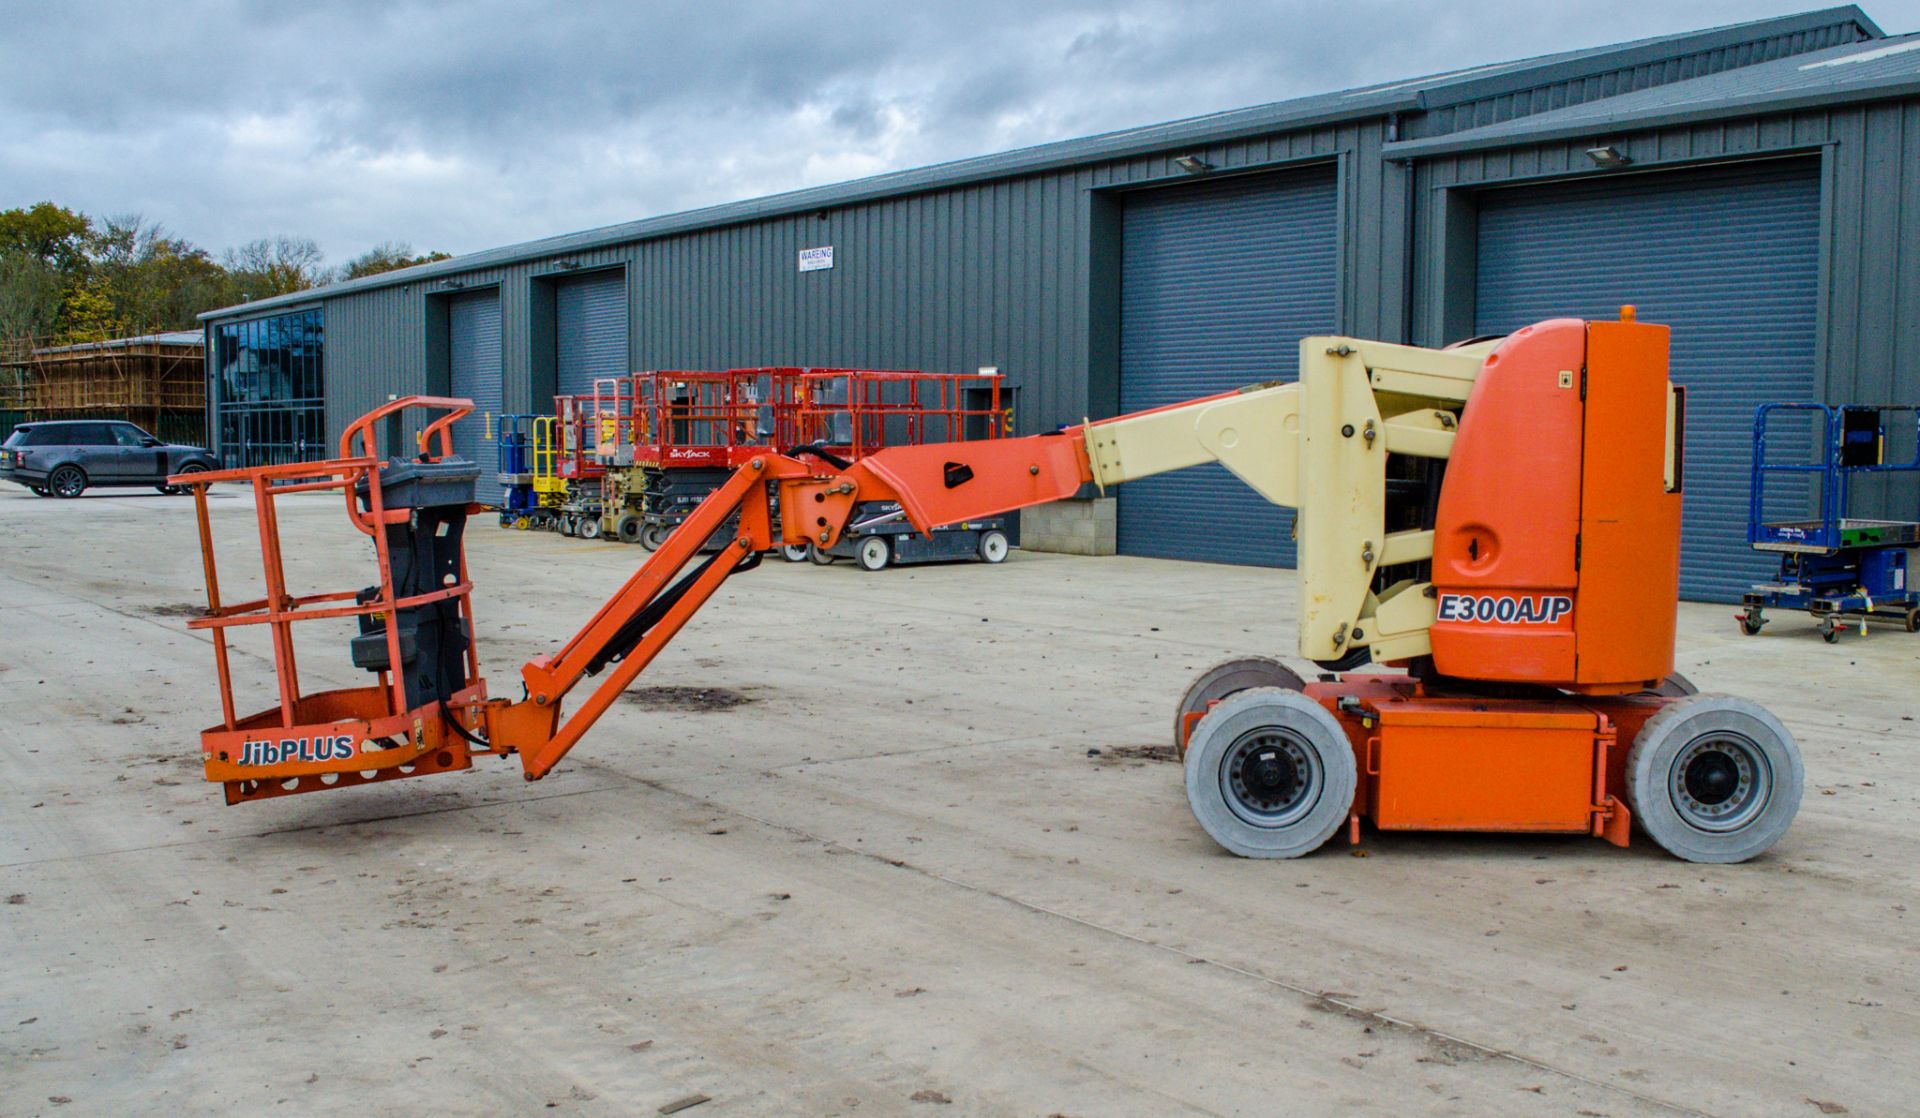 JLG 300AJP battery operated 30ft articulated boom lift Year: 2001 S/N: 0065700 Recorded hours: 663 - Image 8 of 16